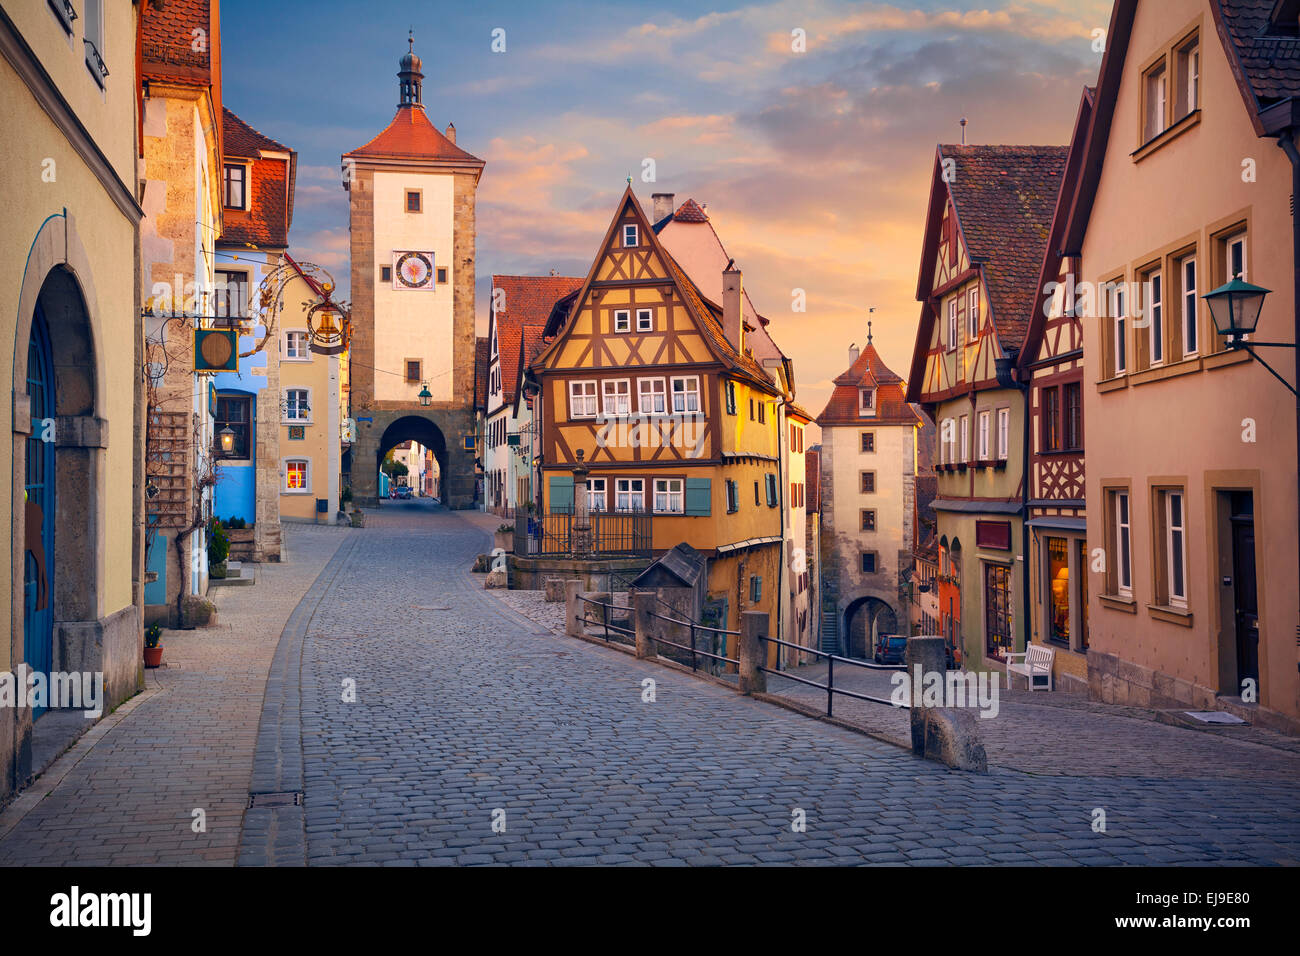 Rothenburg ob der Tauber. Image of the Rothenburg a town in Bavaria, Germany, well known for its medieval old town. Stock Photo